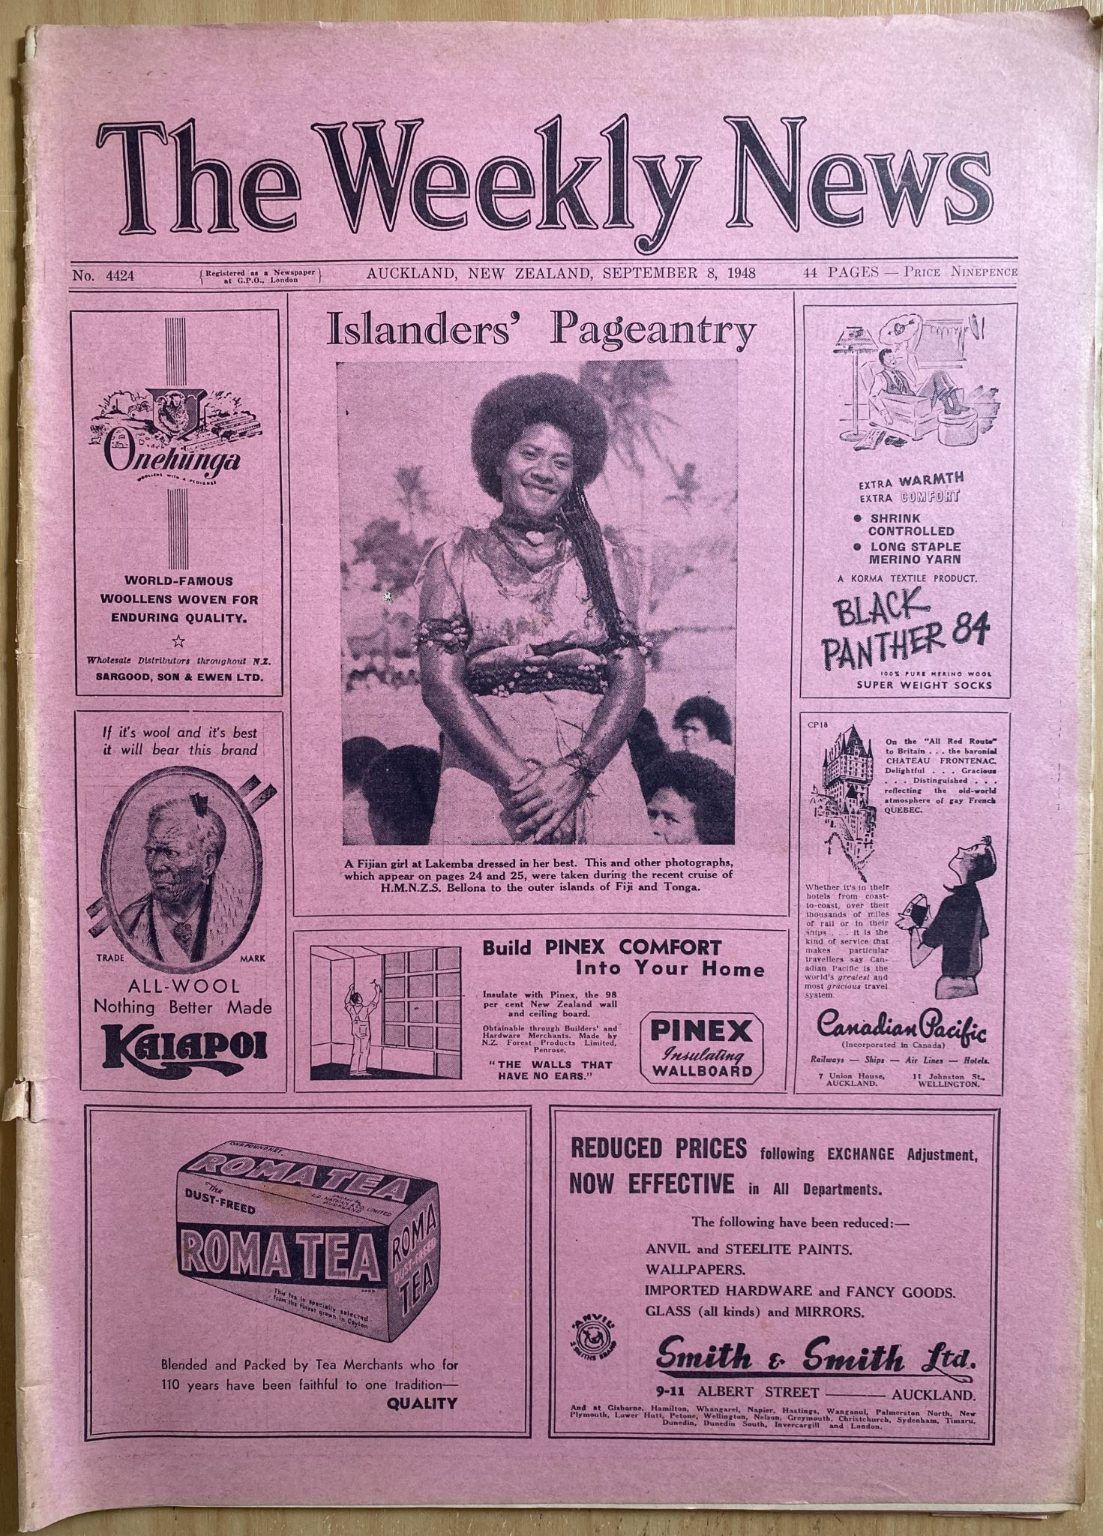 OLD NEWSPAPER: The Weekly News - No. 4424, 8 September 1948